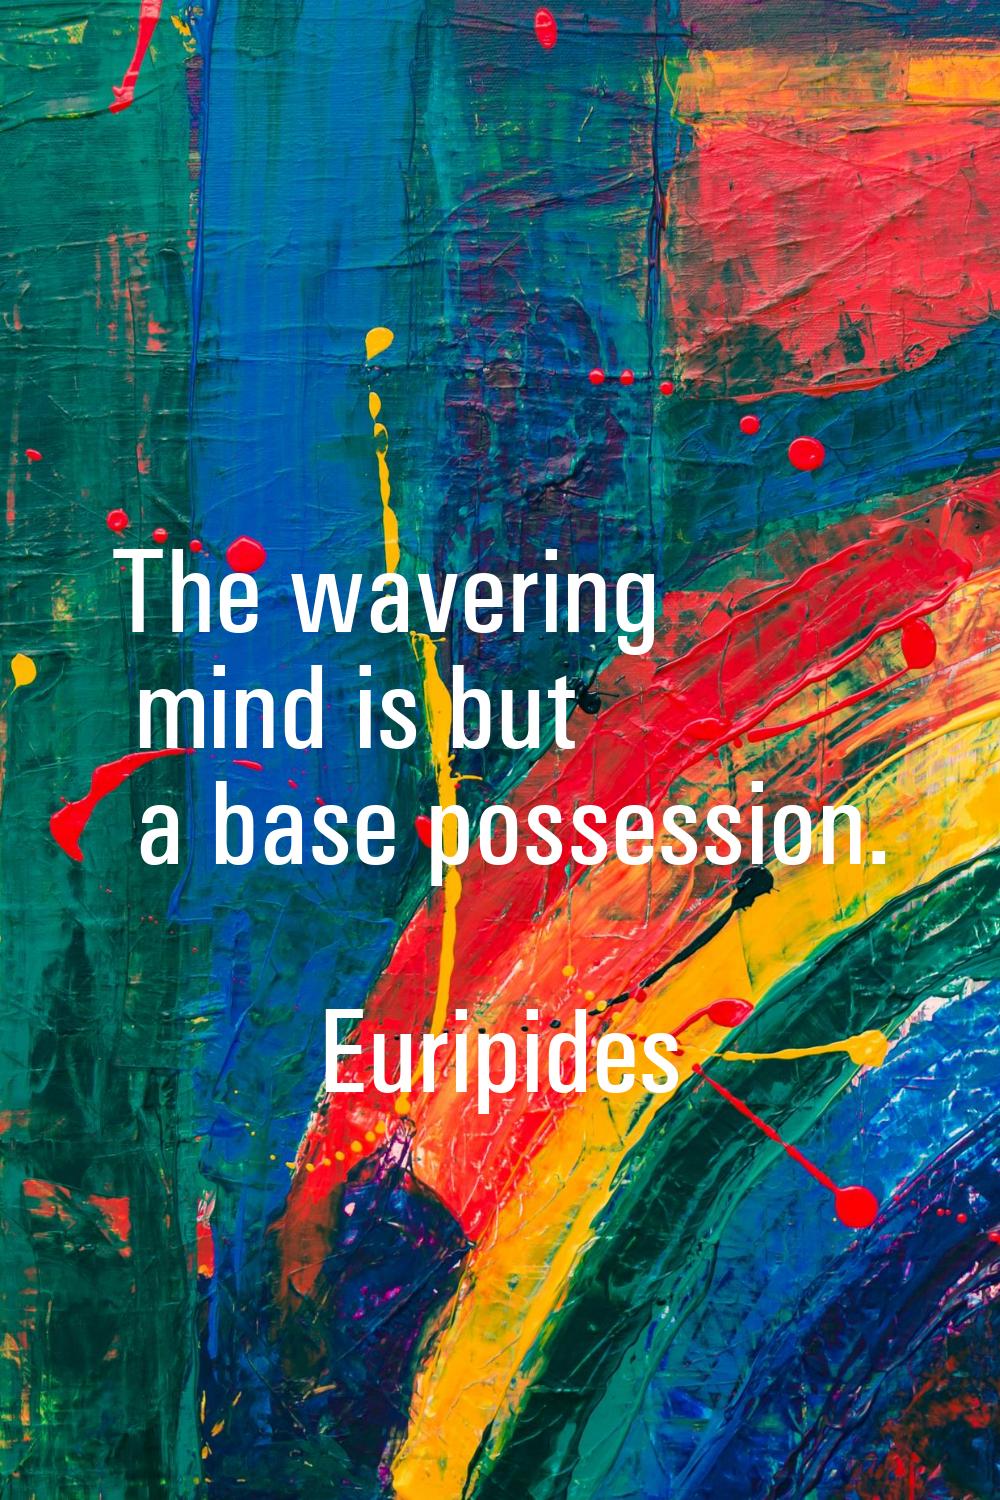 The wavering mind is but a base possession.